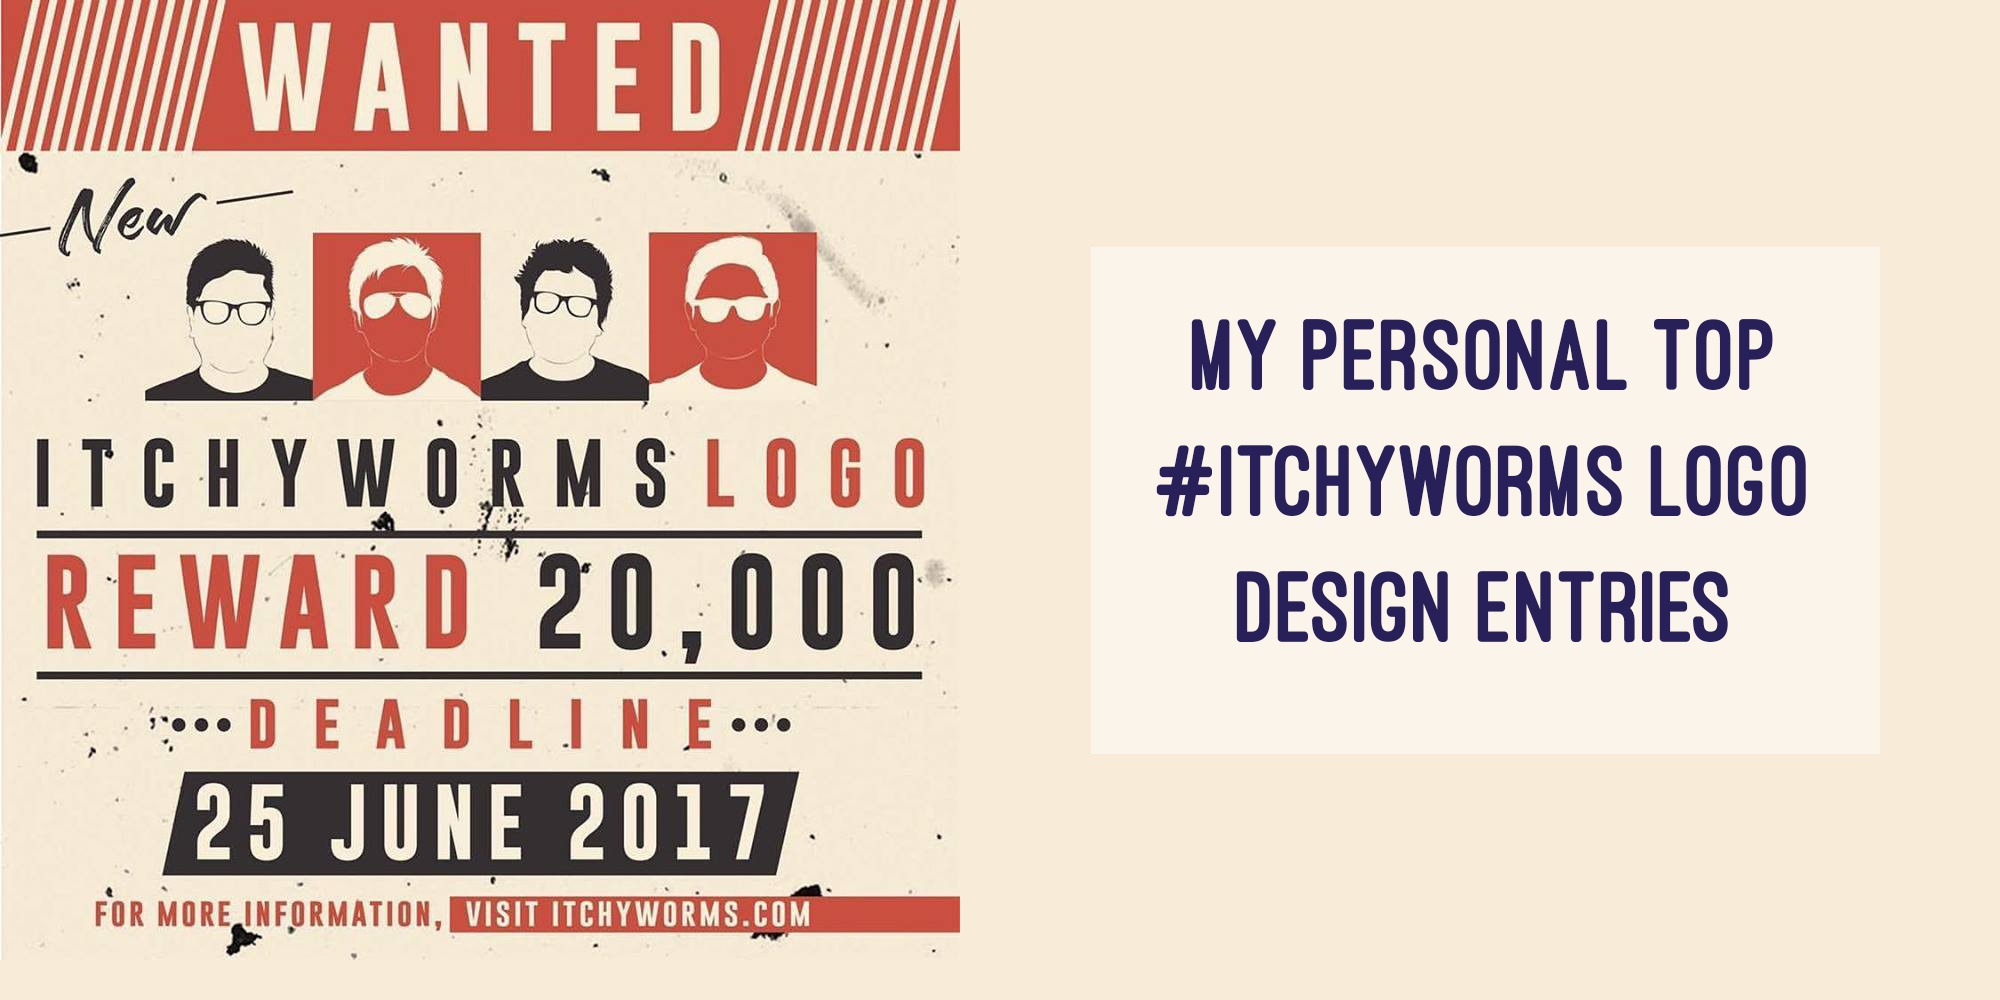 My Personal TOP #itchyworms logo design entries